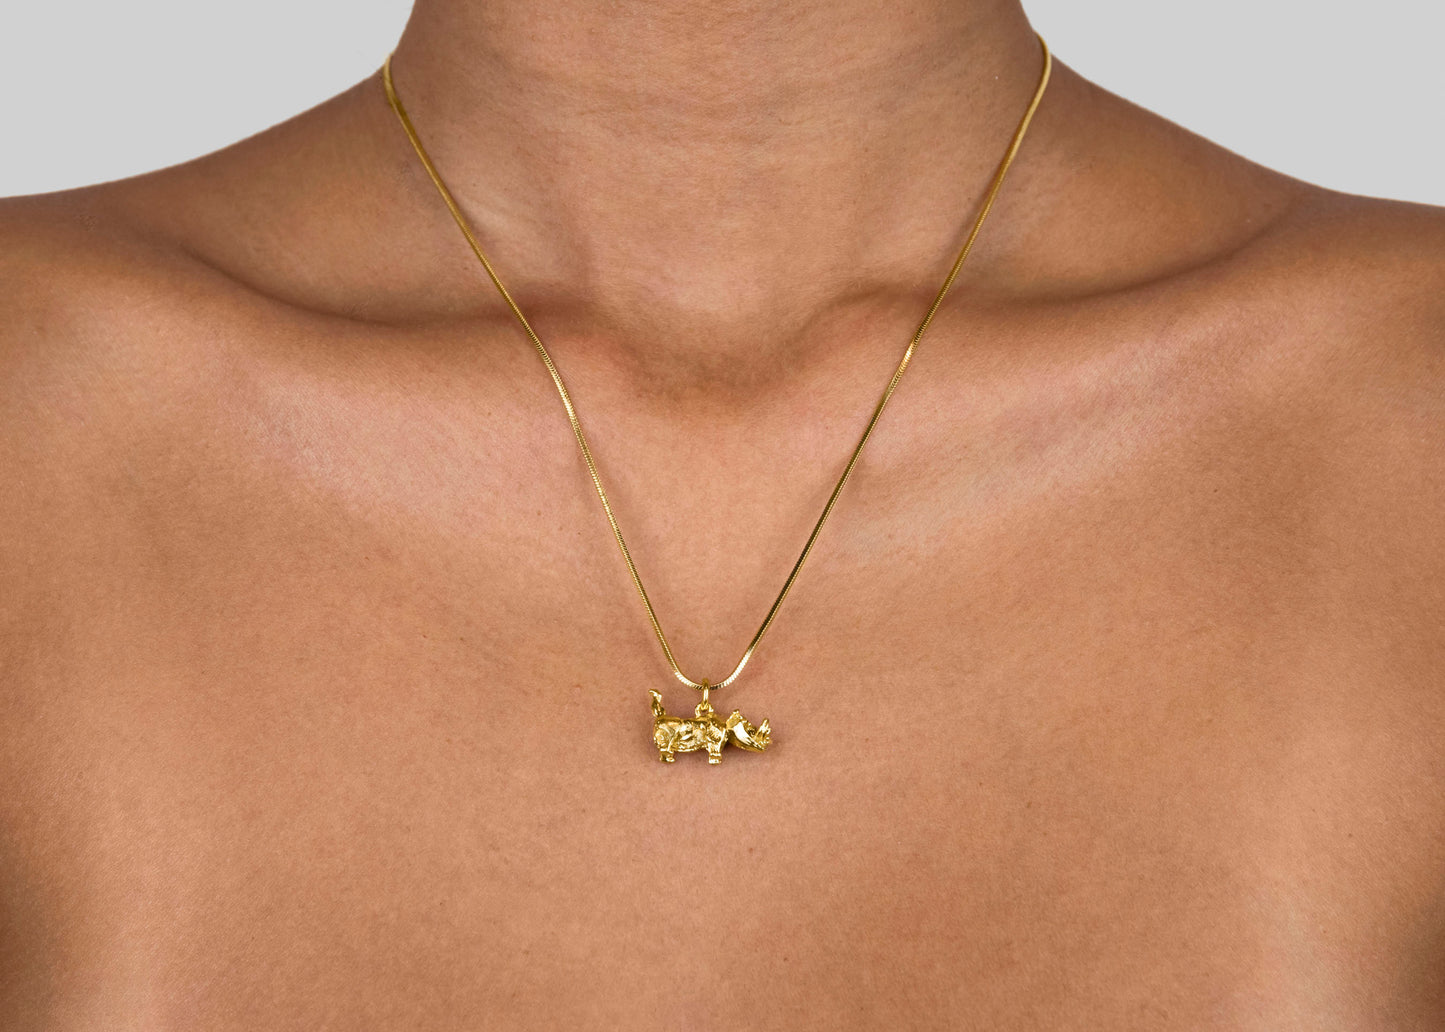 Warthog Origami with Snake Chain Necklace